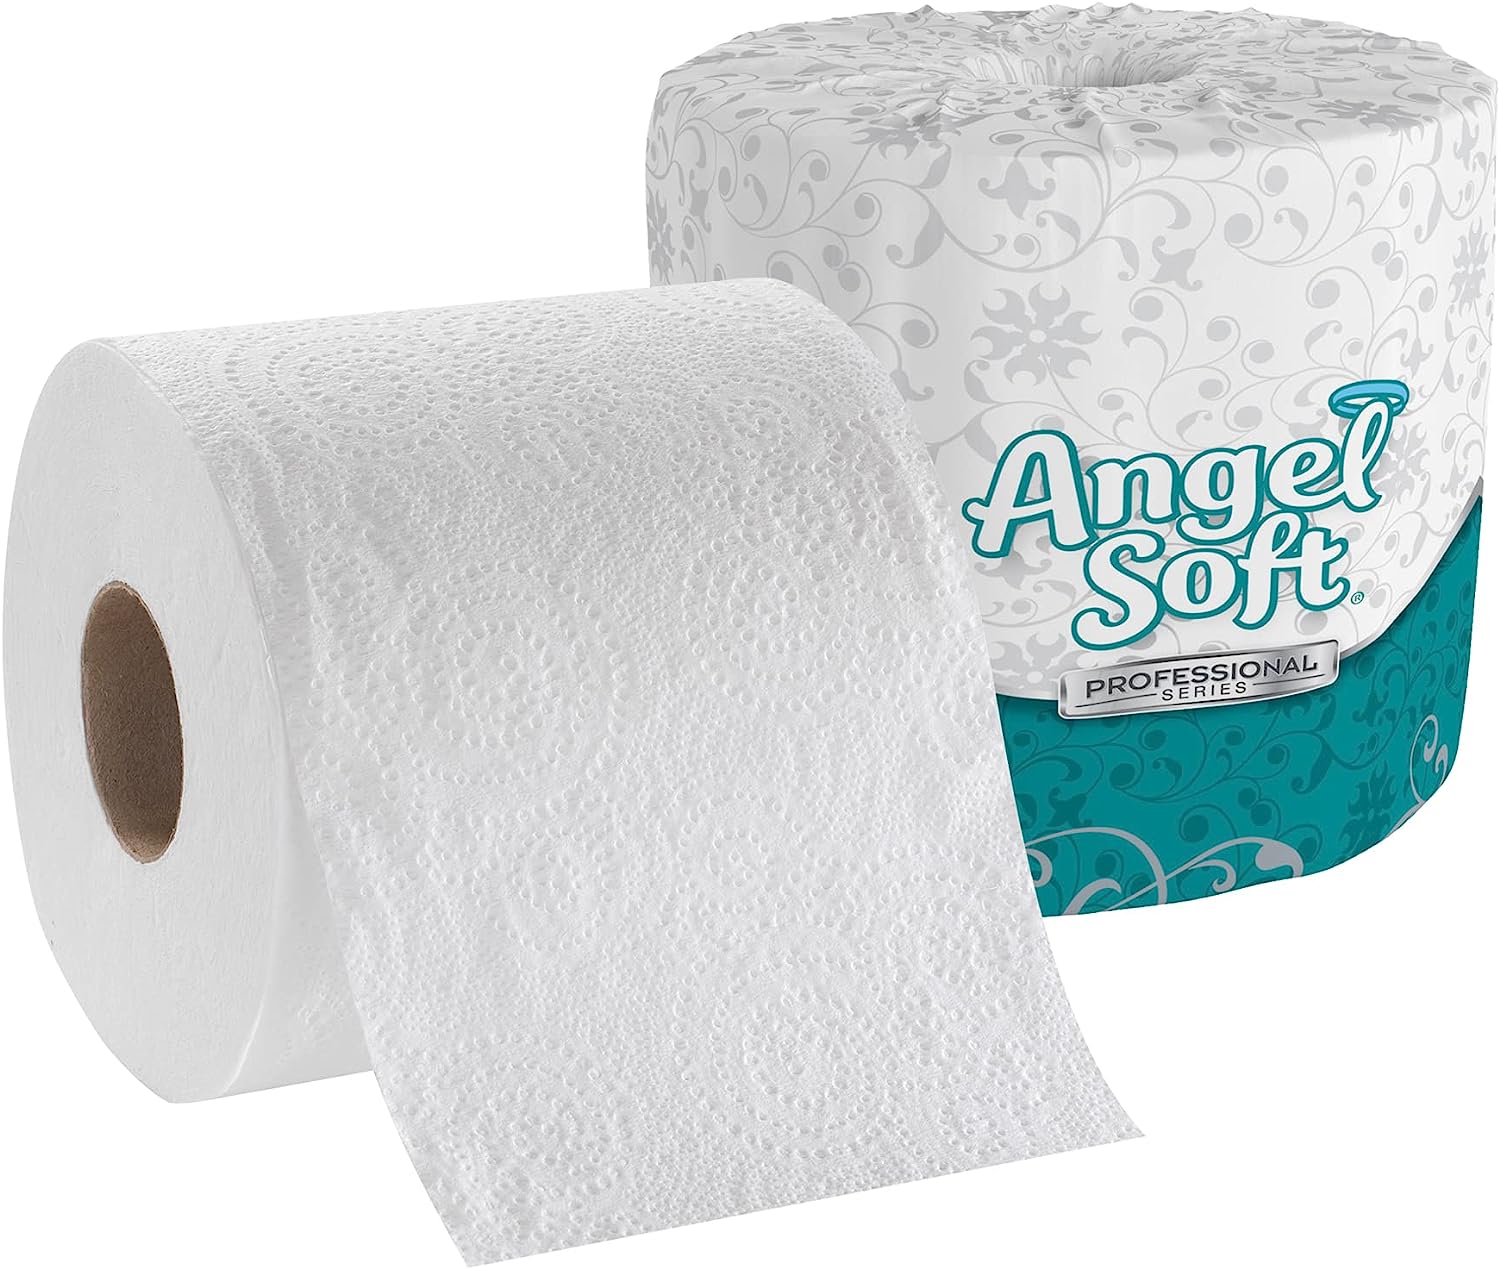 Georgia-Pacific Angel Soft Ultra Professional Series 2-Ply Embossed ...